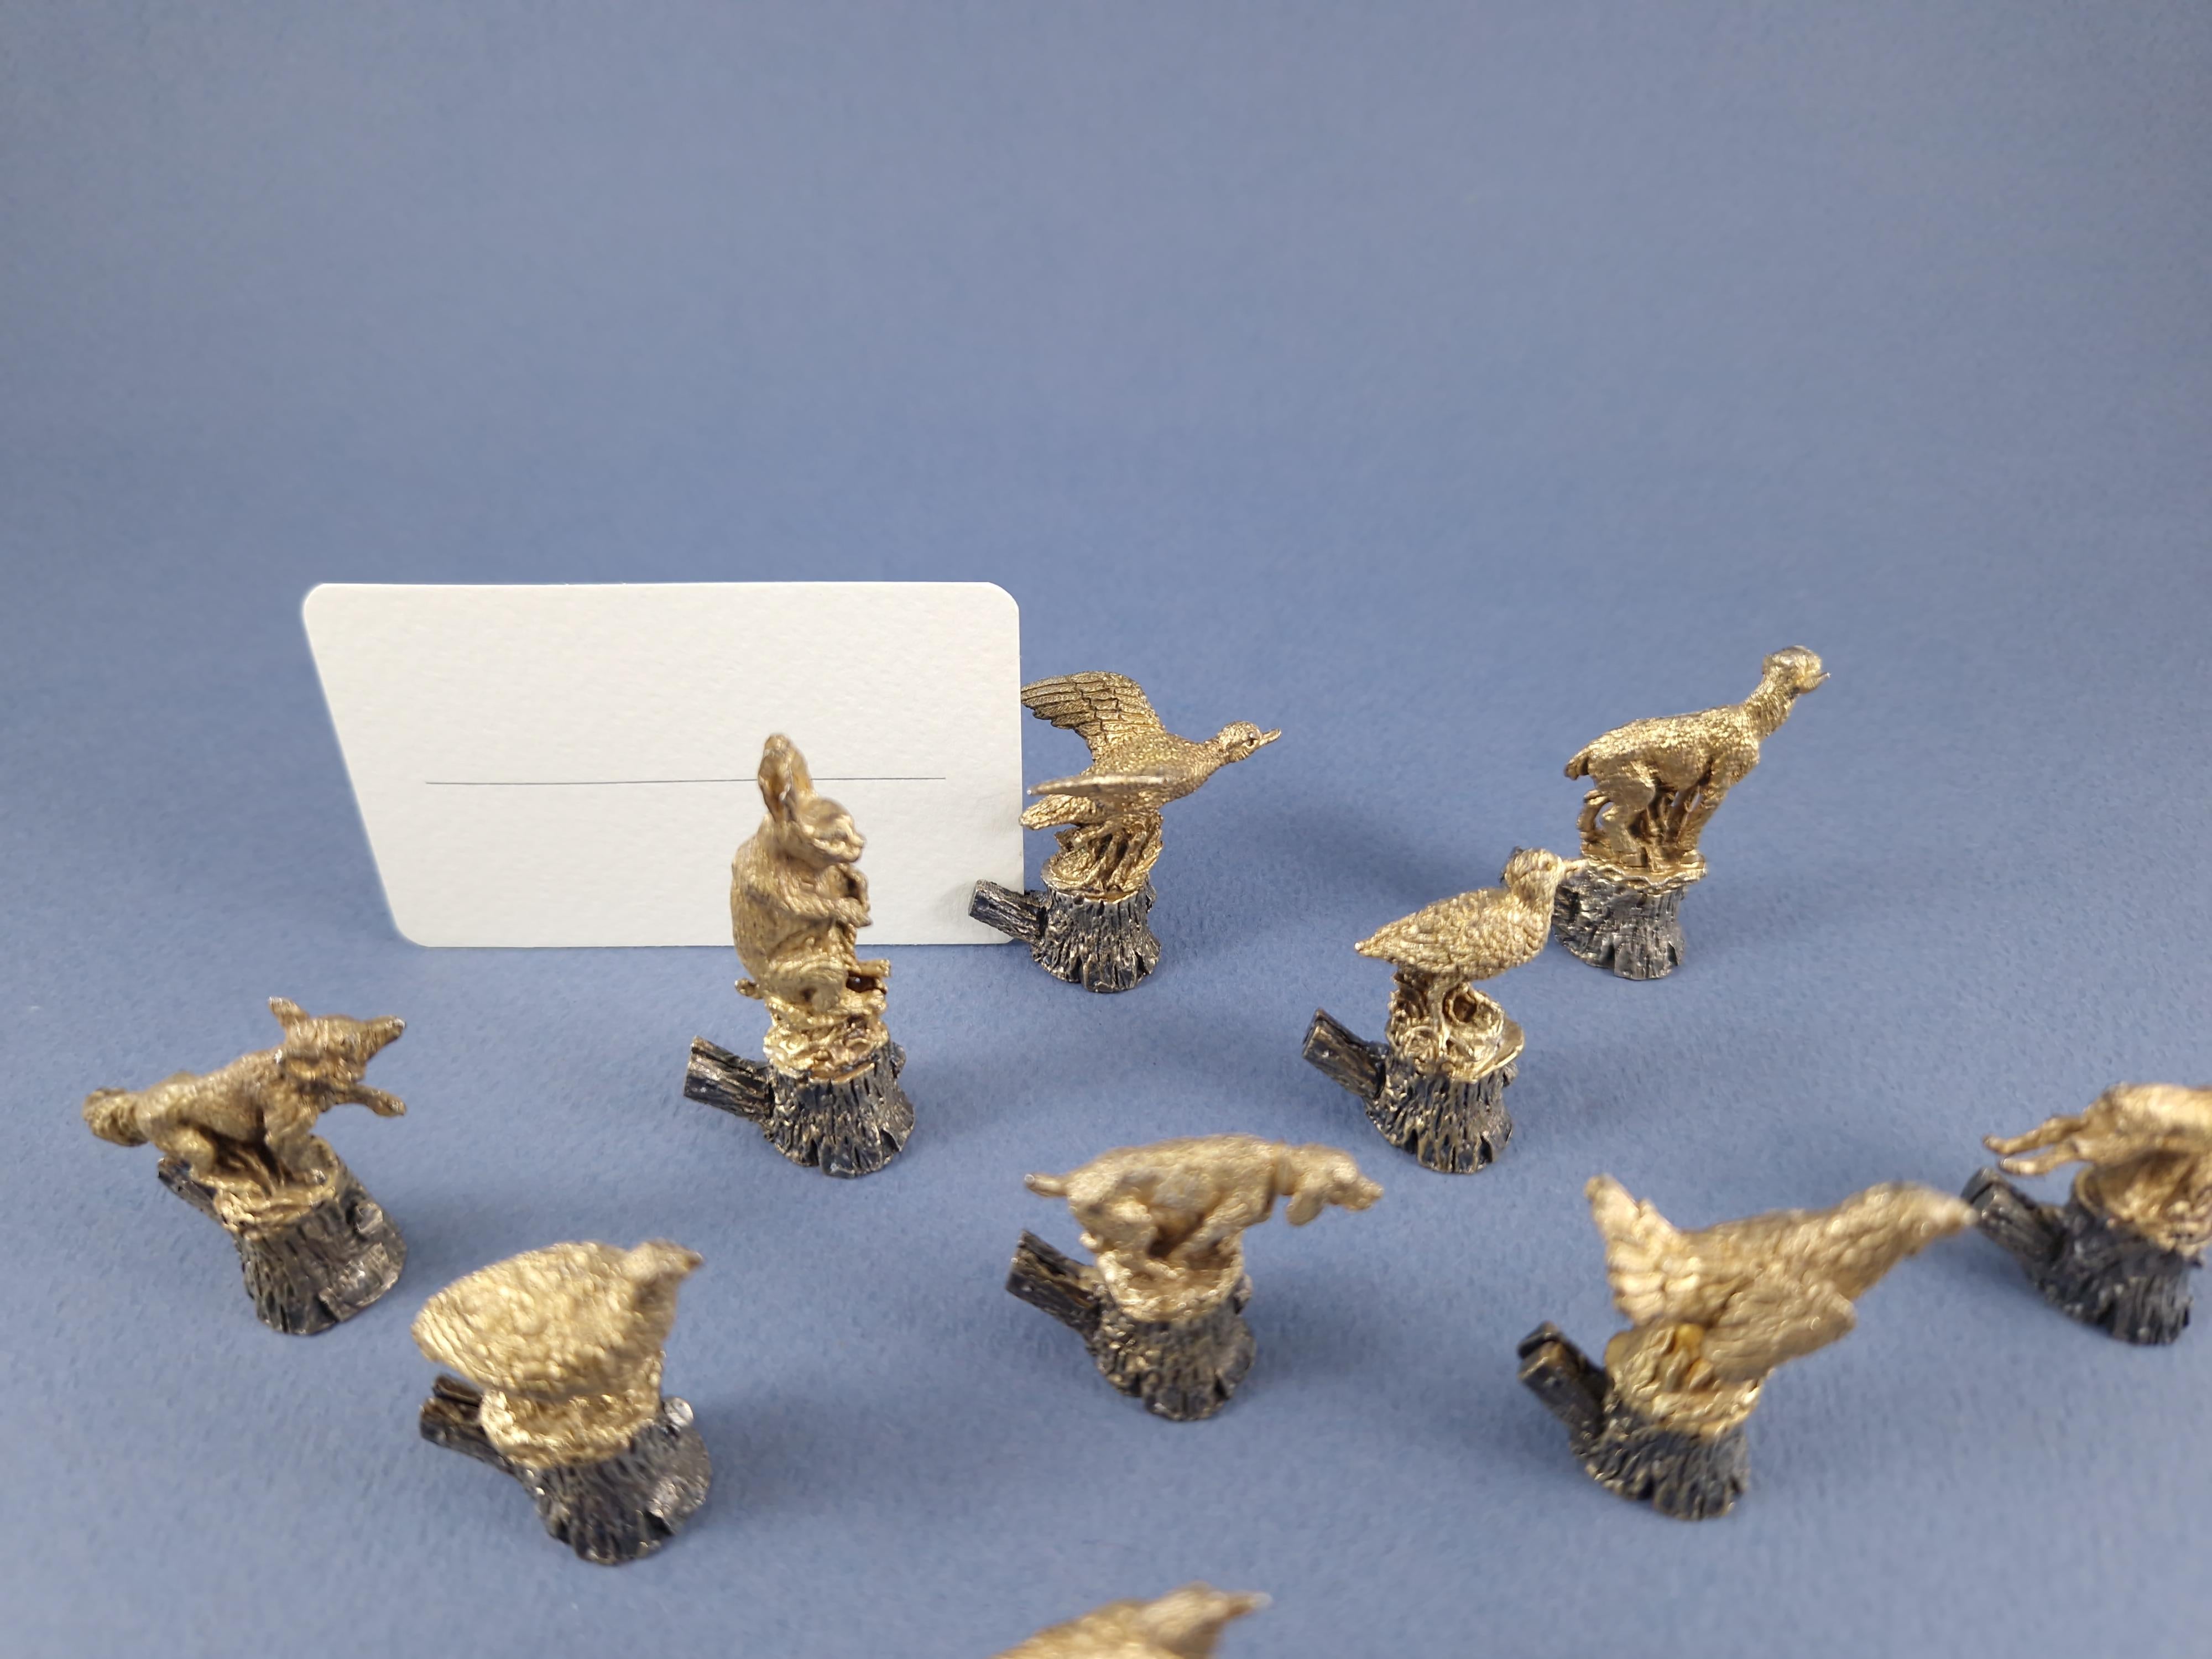 Beautiful set of 12 Solid Silver Place Card Holders and gilt decorated with animals on a wooden trunk 

800 Silver hallmark 
Silversmith: Bartolini Bartolozzi 

Height between 2.9 and 4.8 cm  (between 1.14 inches and 1.89 inches)
Weight: 204